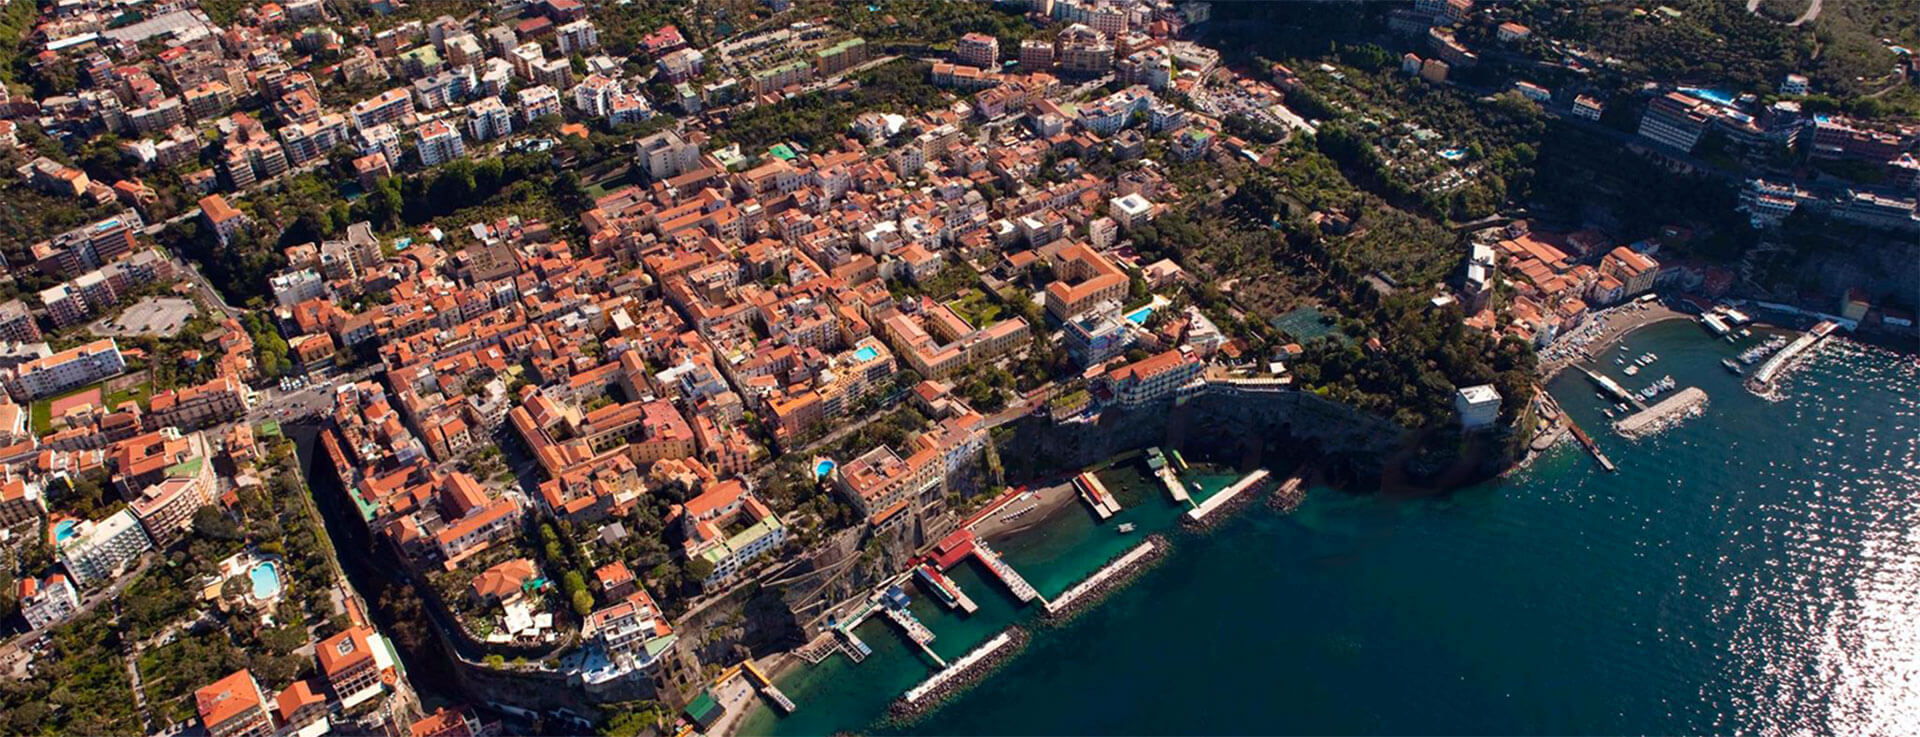 Sorrento seen from above